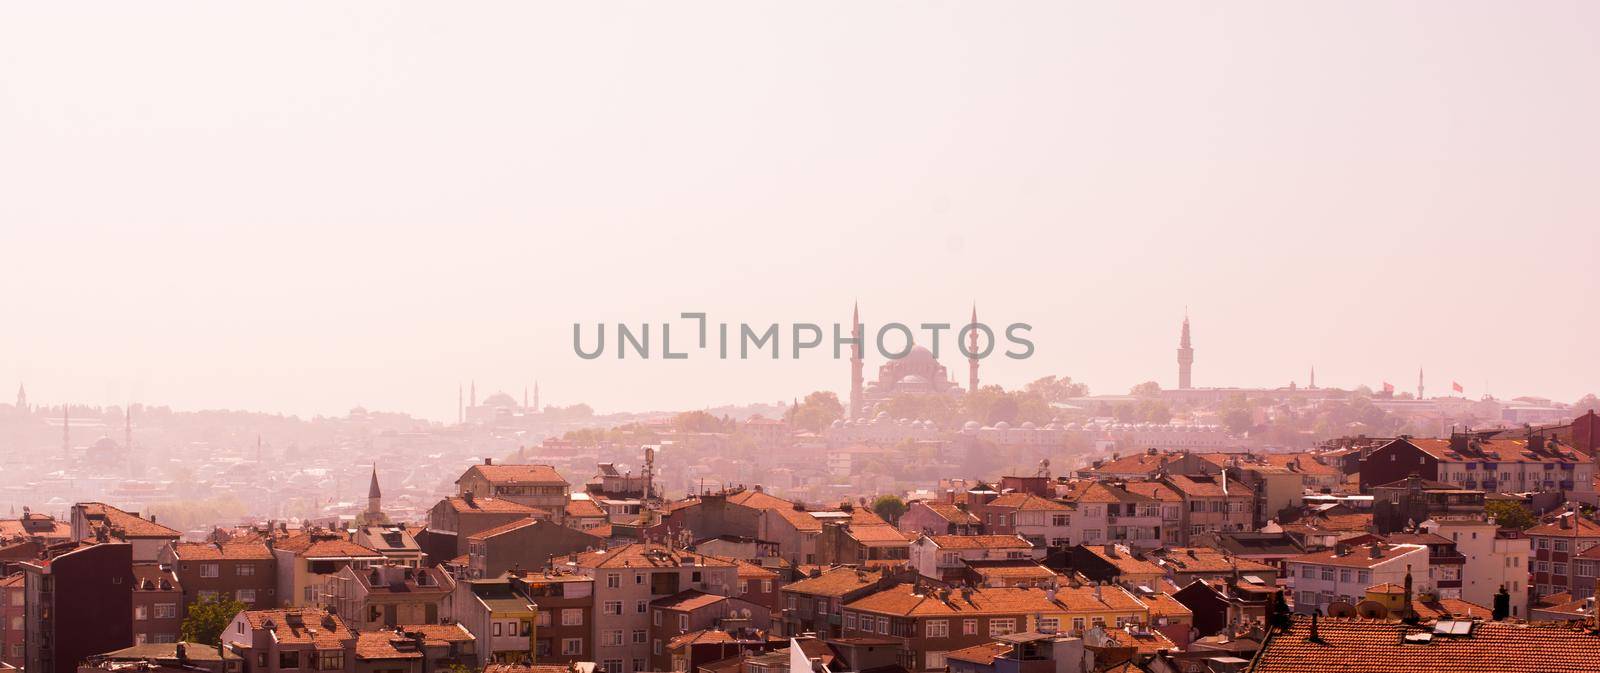 Istanbul Cityscape with famous building silhouette by berkay